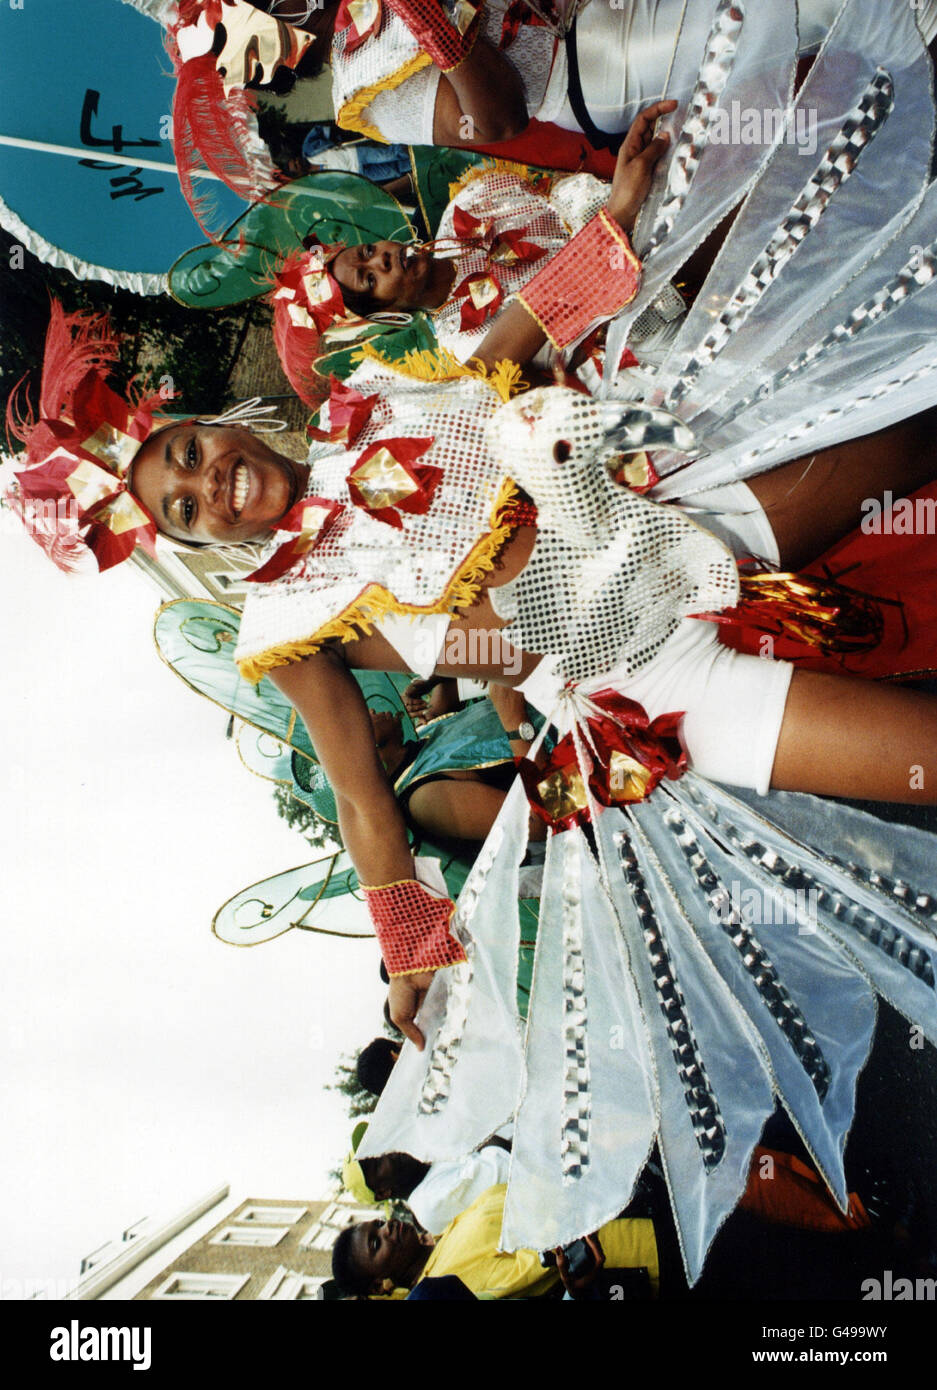 A young woman dresses in costume during the Notting Hill Carnival in London, Europe's largest street festival. Stock Photo